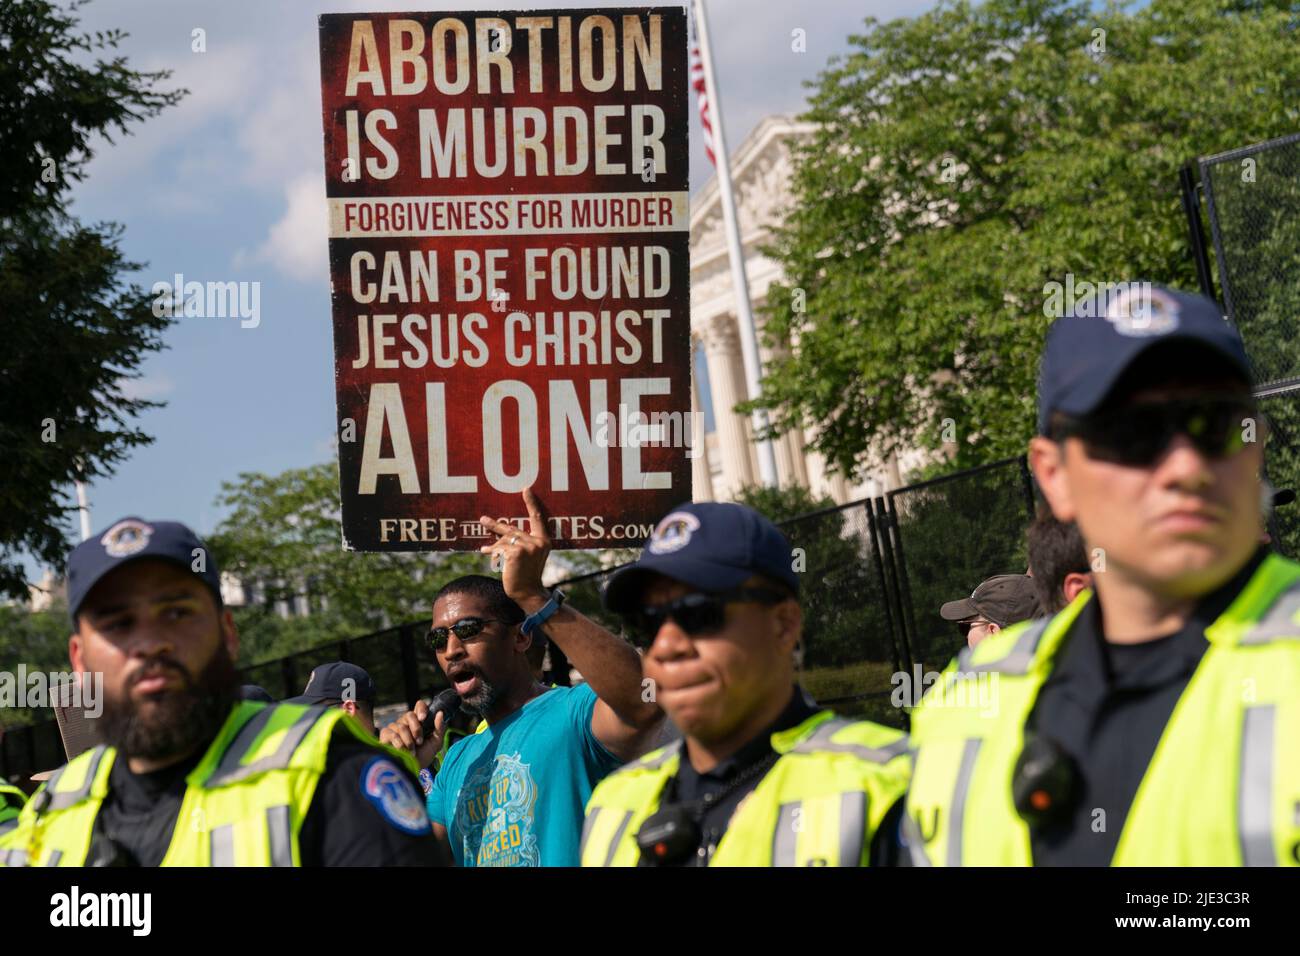 Washington, USA. 24th June, 2022. Police defend an anti-abortion demonstrator from protesters in opposition outside the Supreme Court in Washington, DC Friday, June 24, 2022. The Supreme Court overturned Roe v, Wade eliminating the right to abortion in the U.S. (Photo by Chris Kleponis/Sipa USA) Credit: Sipa USA/Alamy Live News Stock Photo